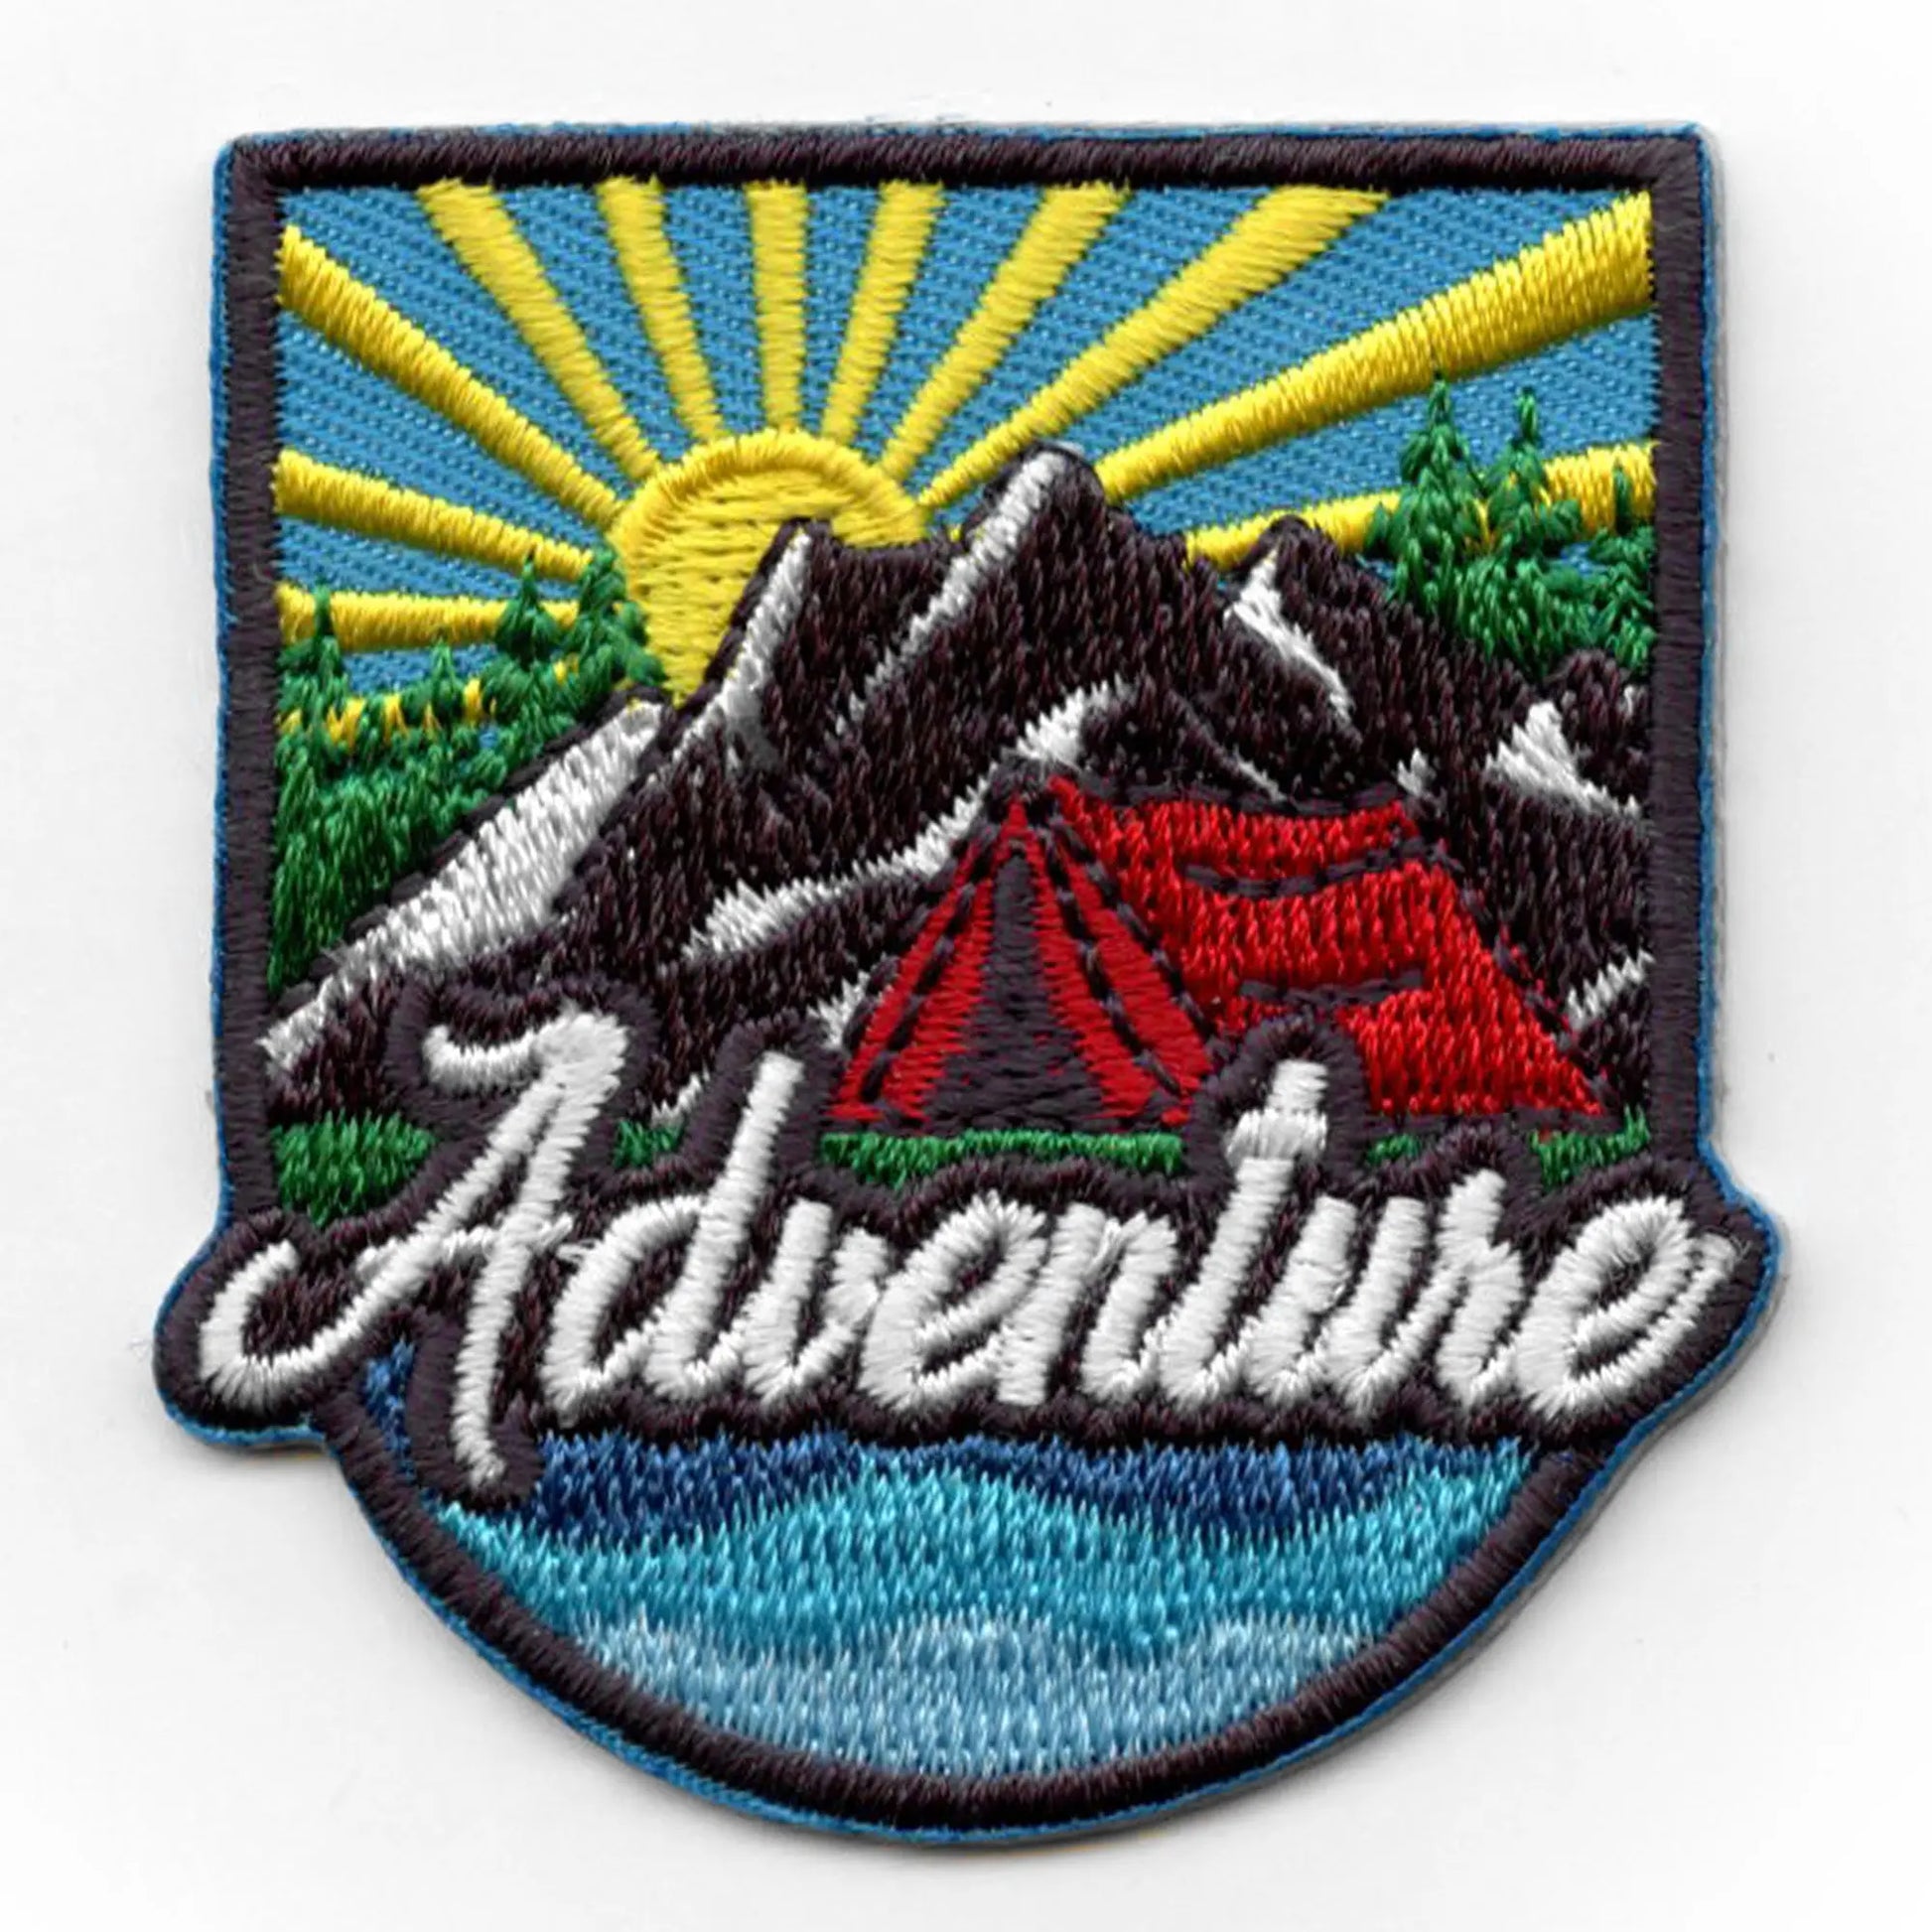 Adventure Outdoor Experience Patch Travel Nature Vacation Embroidered Iron On